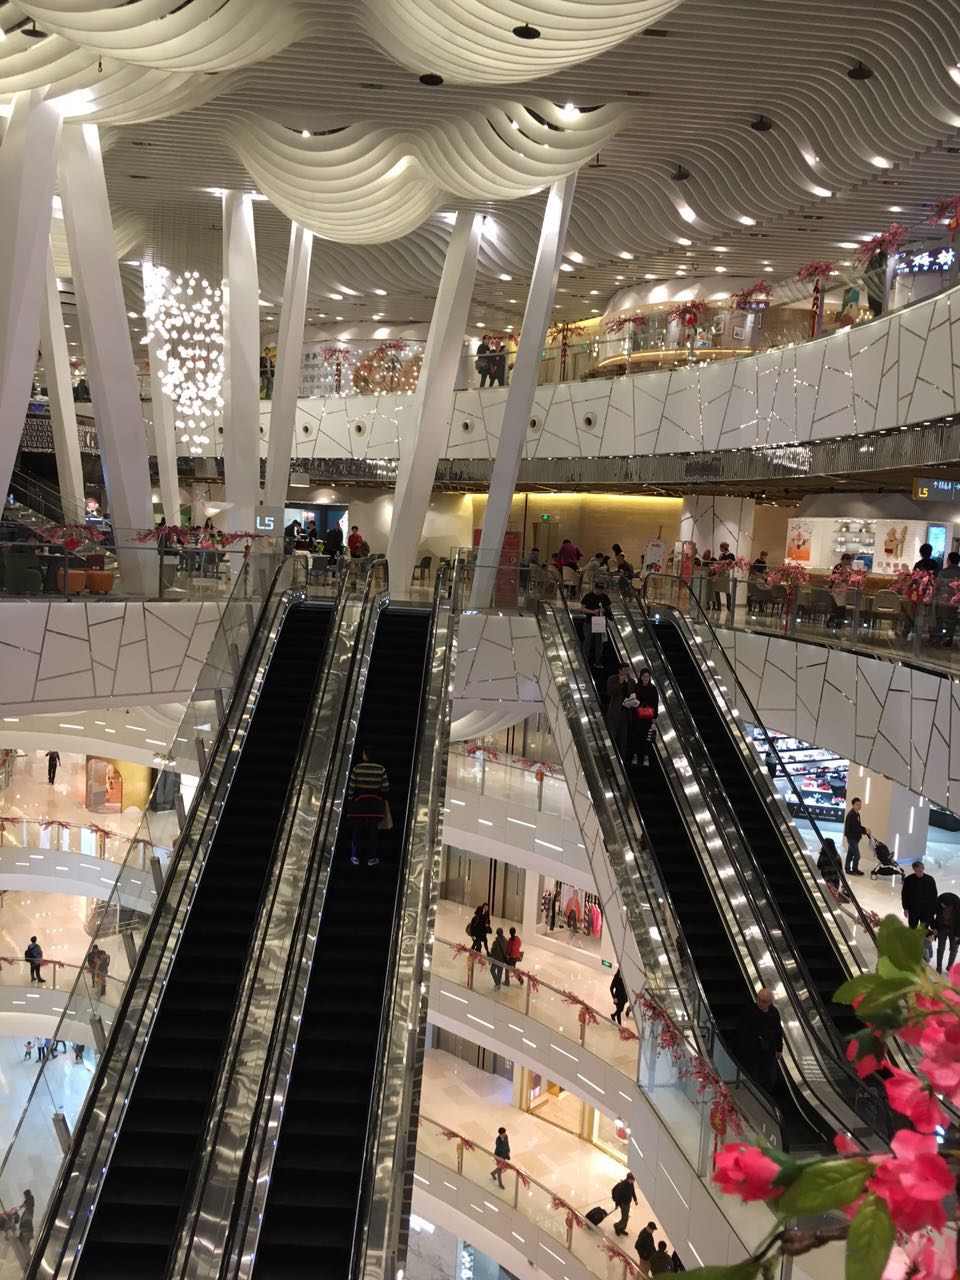 Shopping malls in Shanghai are rather big